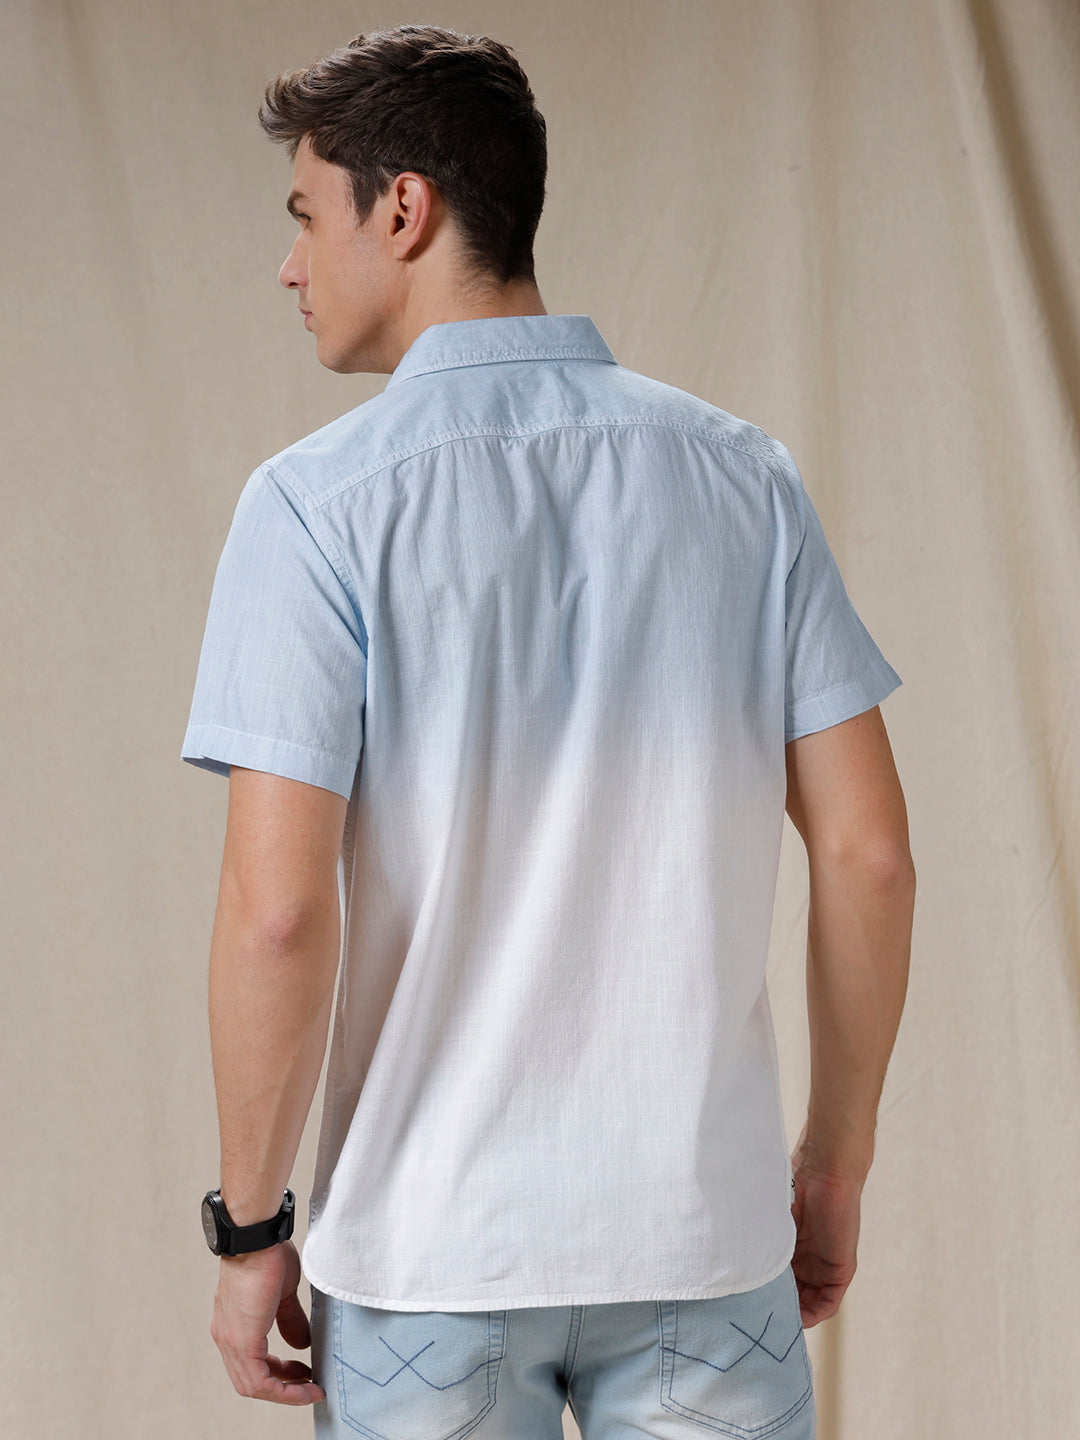 Fade In Blue Ombre Shirt